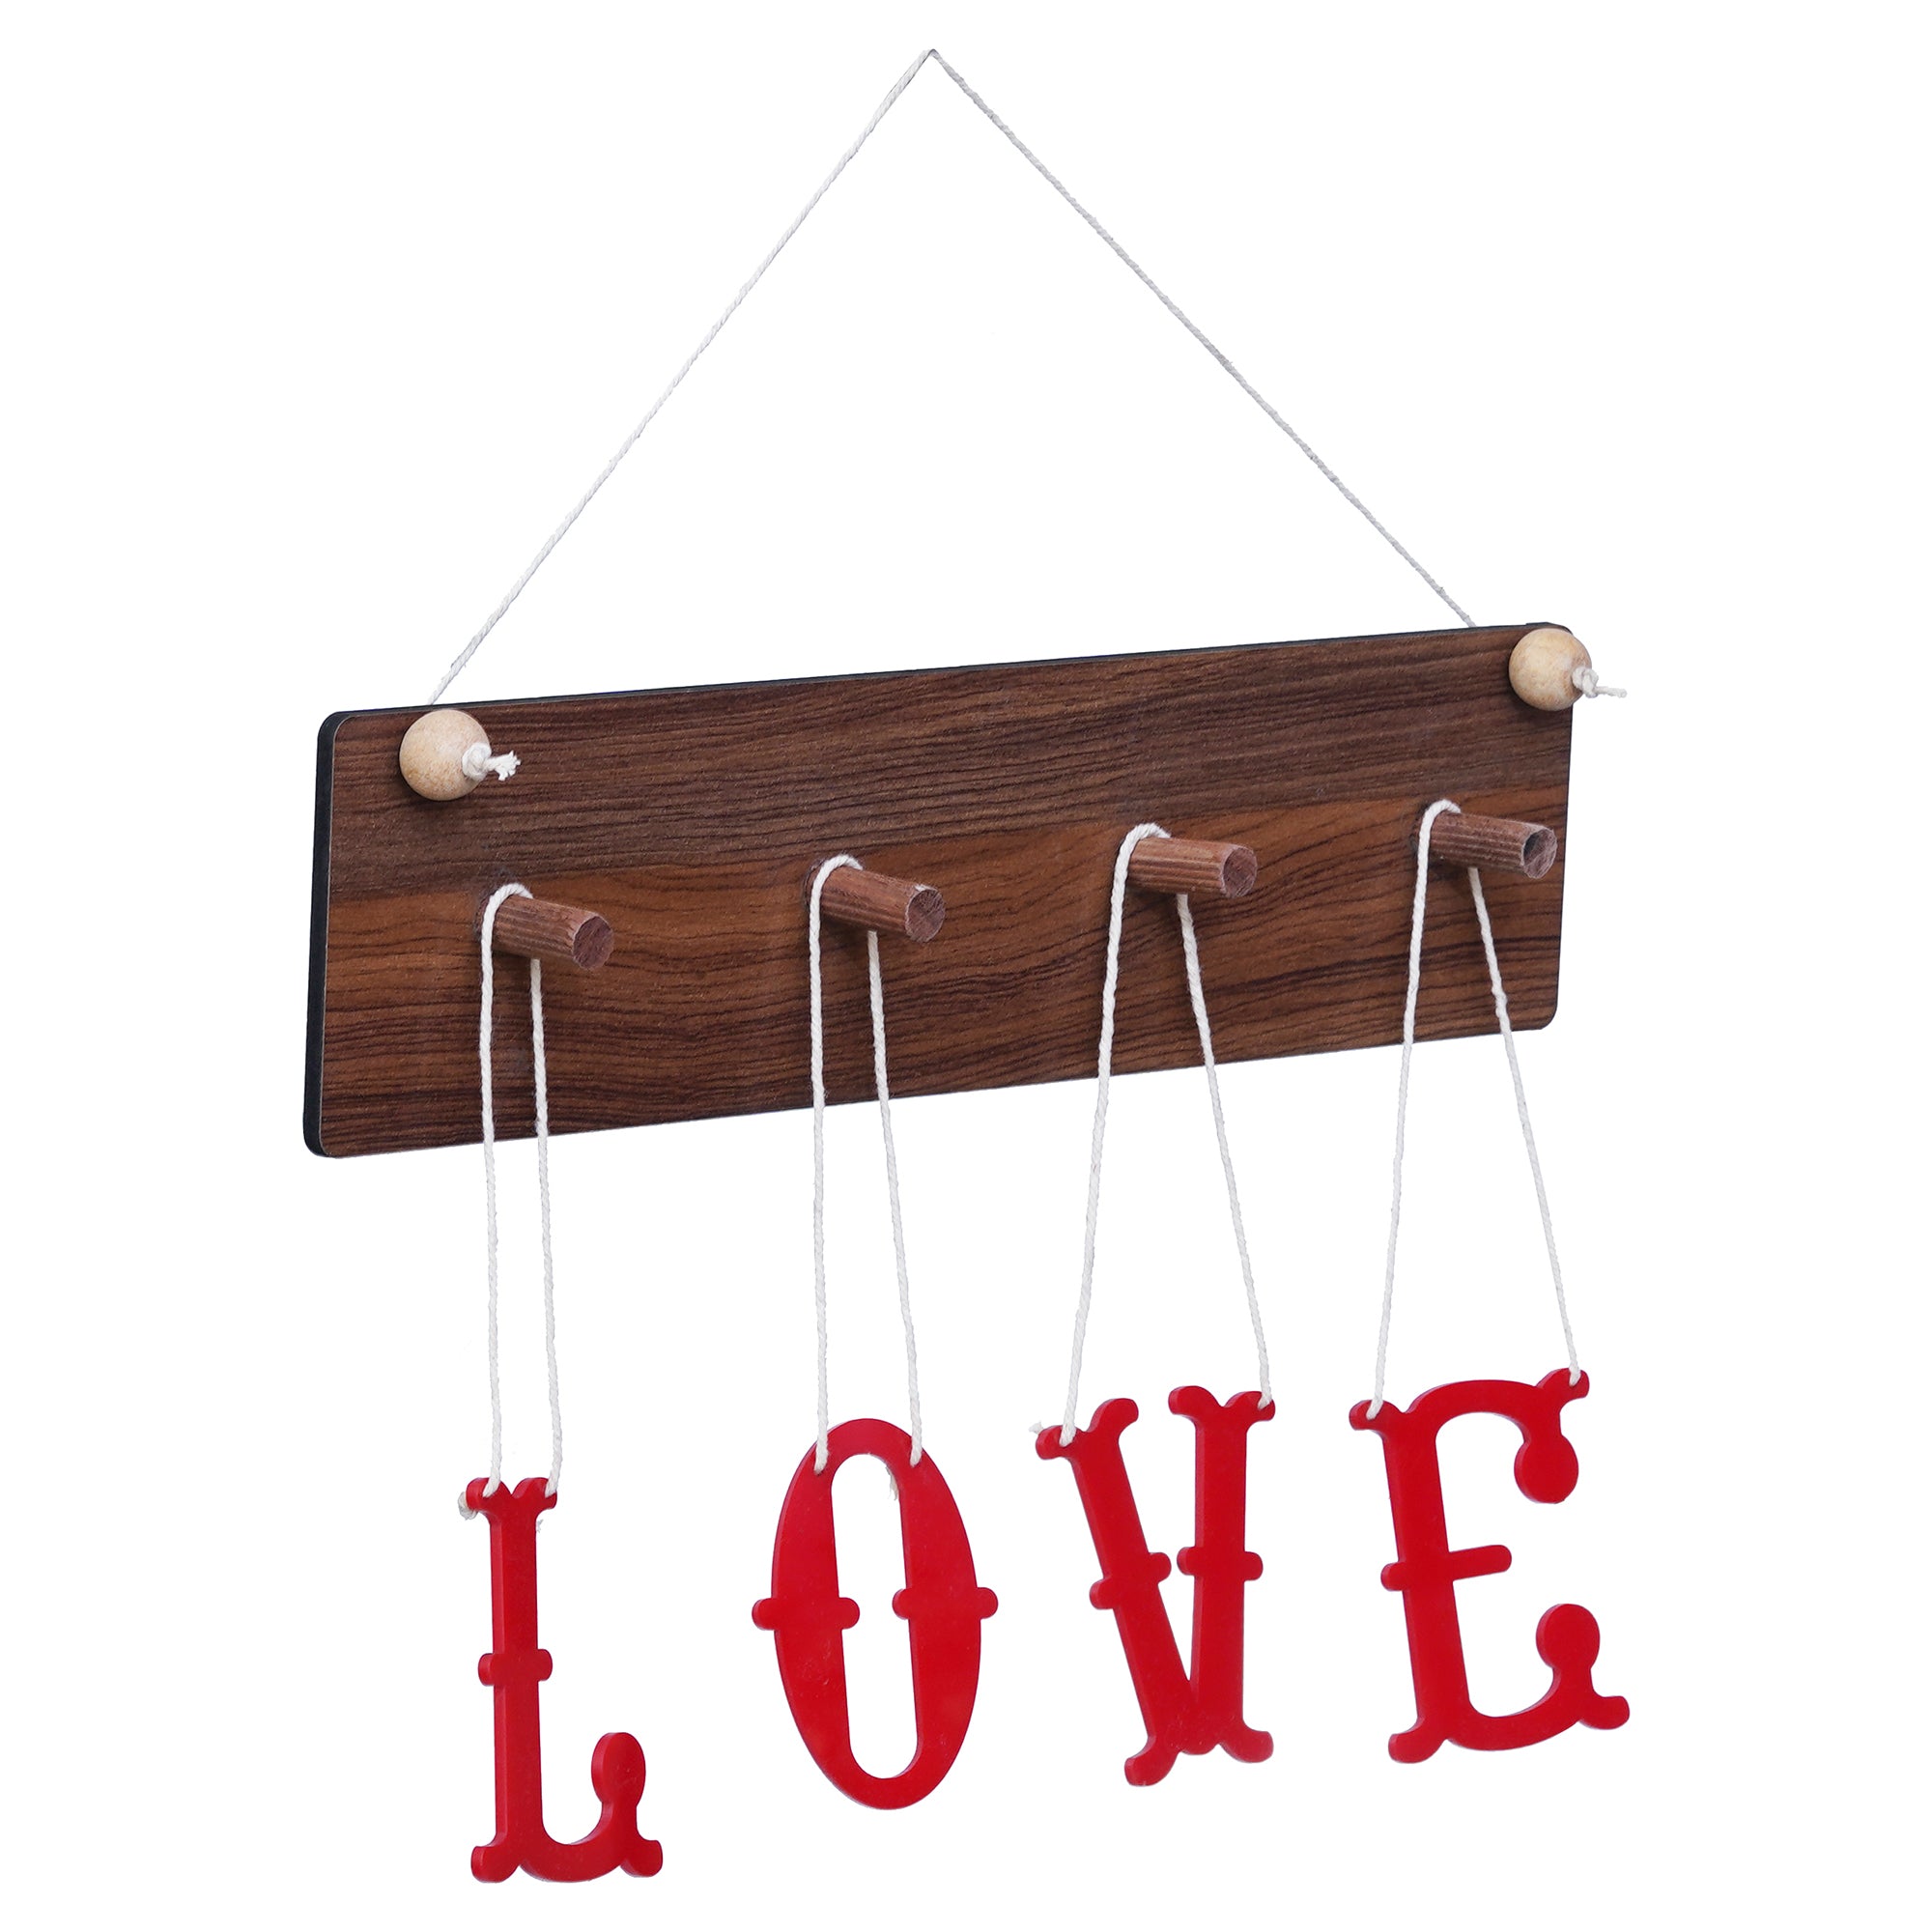 Brown & Red "LOVE" Sign Wooden Wall Hanging Showpiece 6